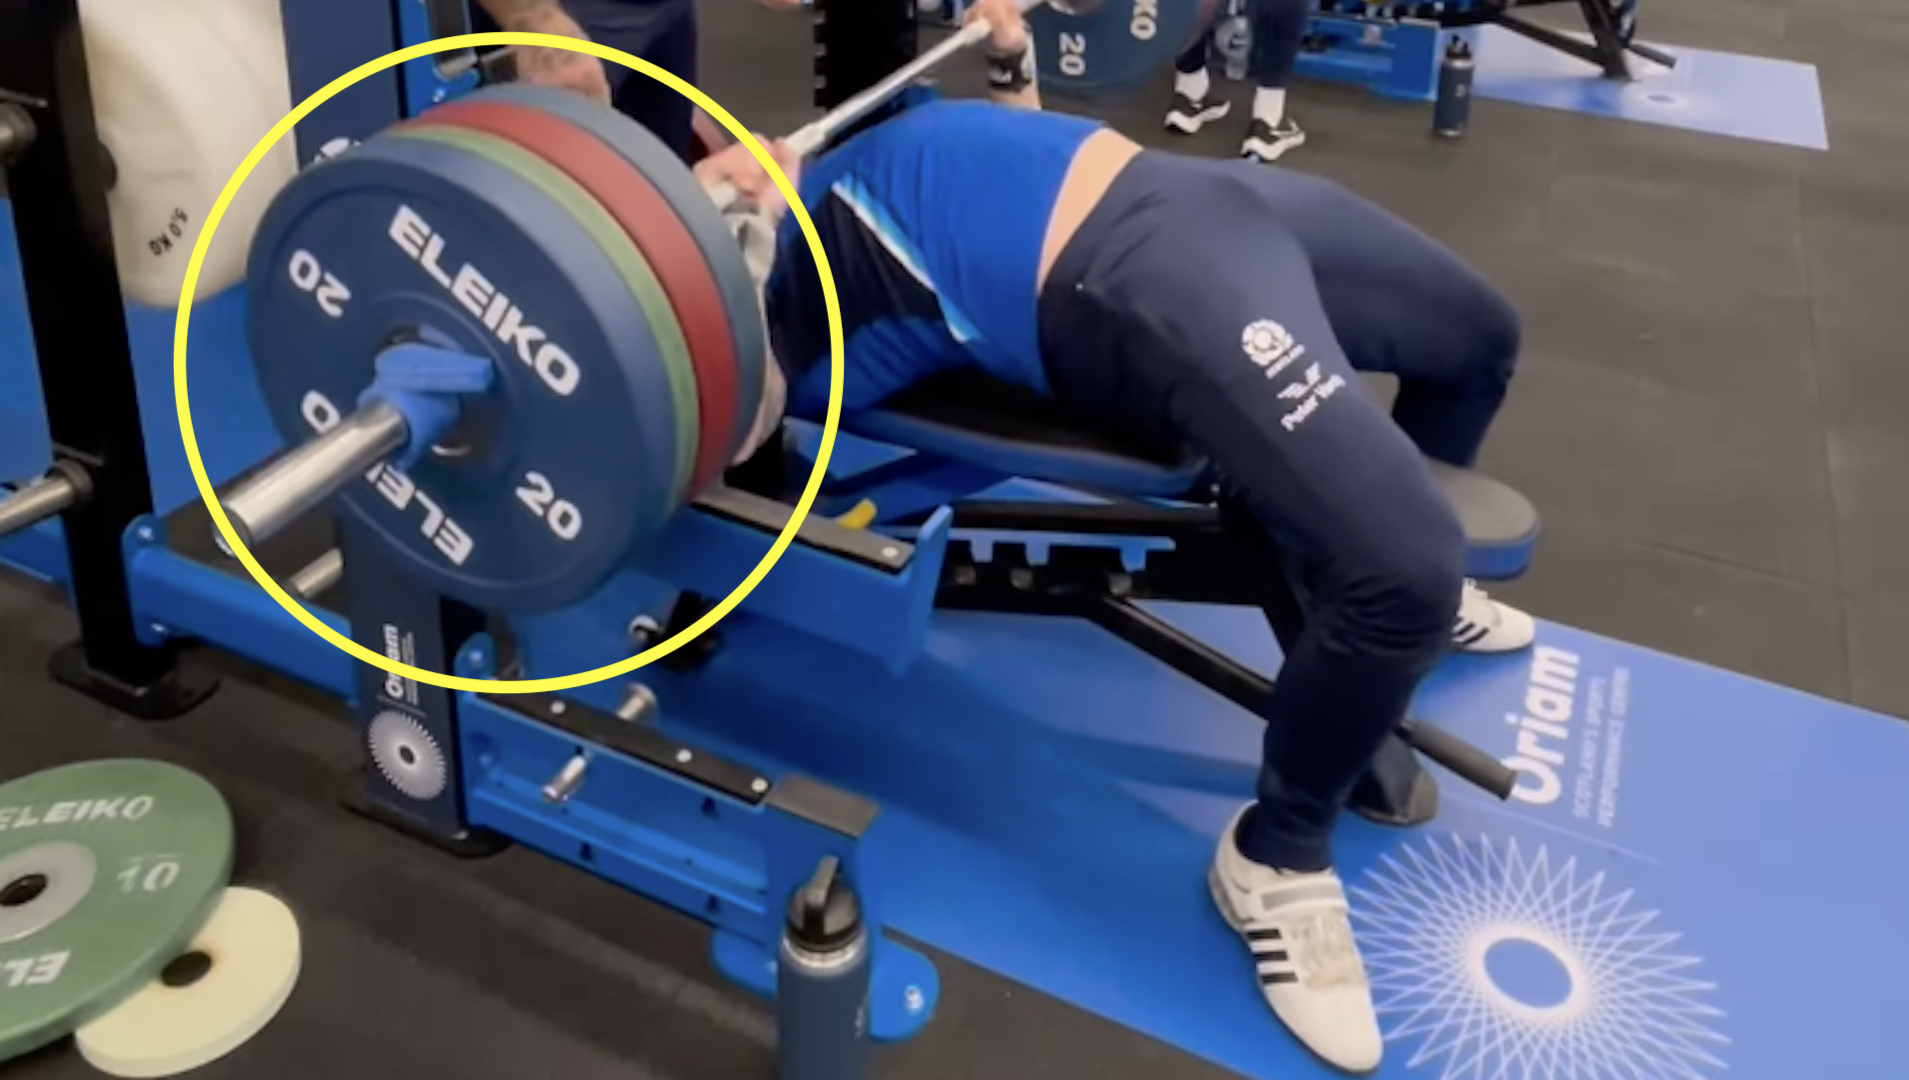 Scotland prop celebrates win over England with monster bench press